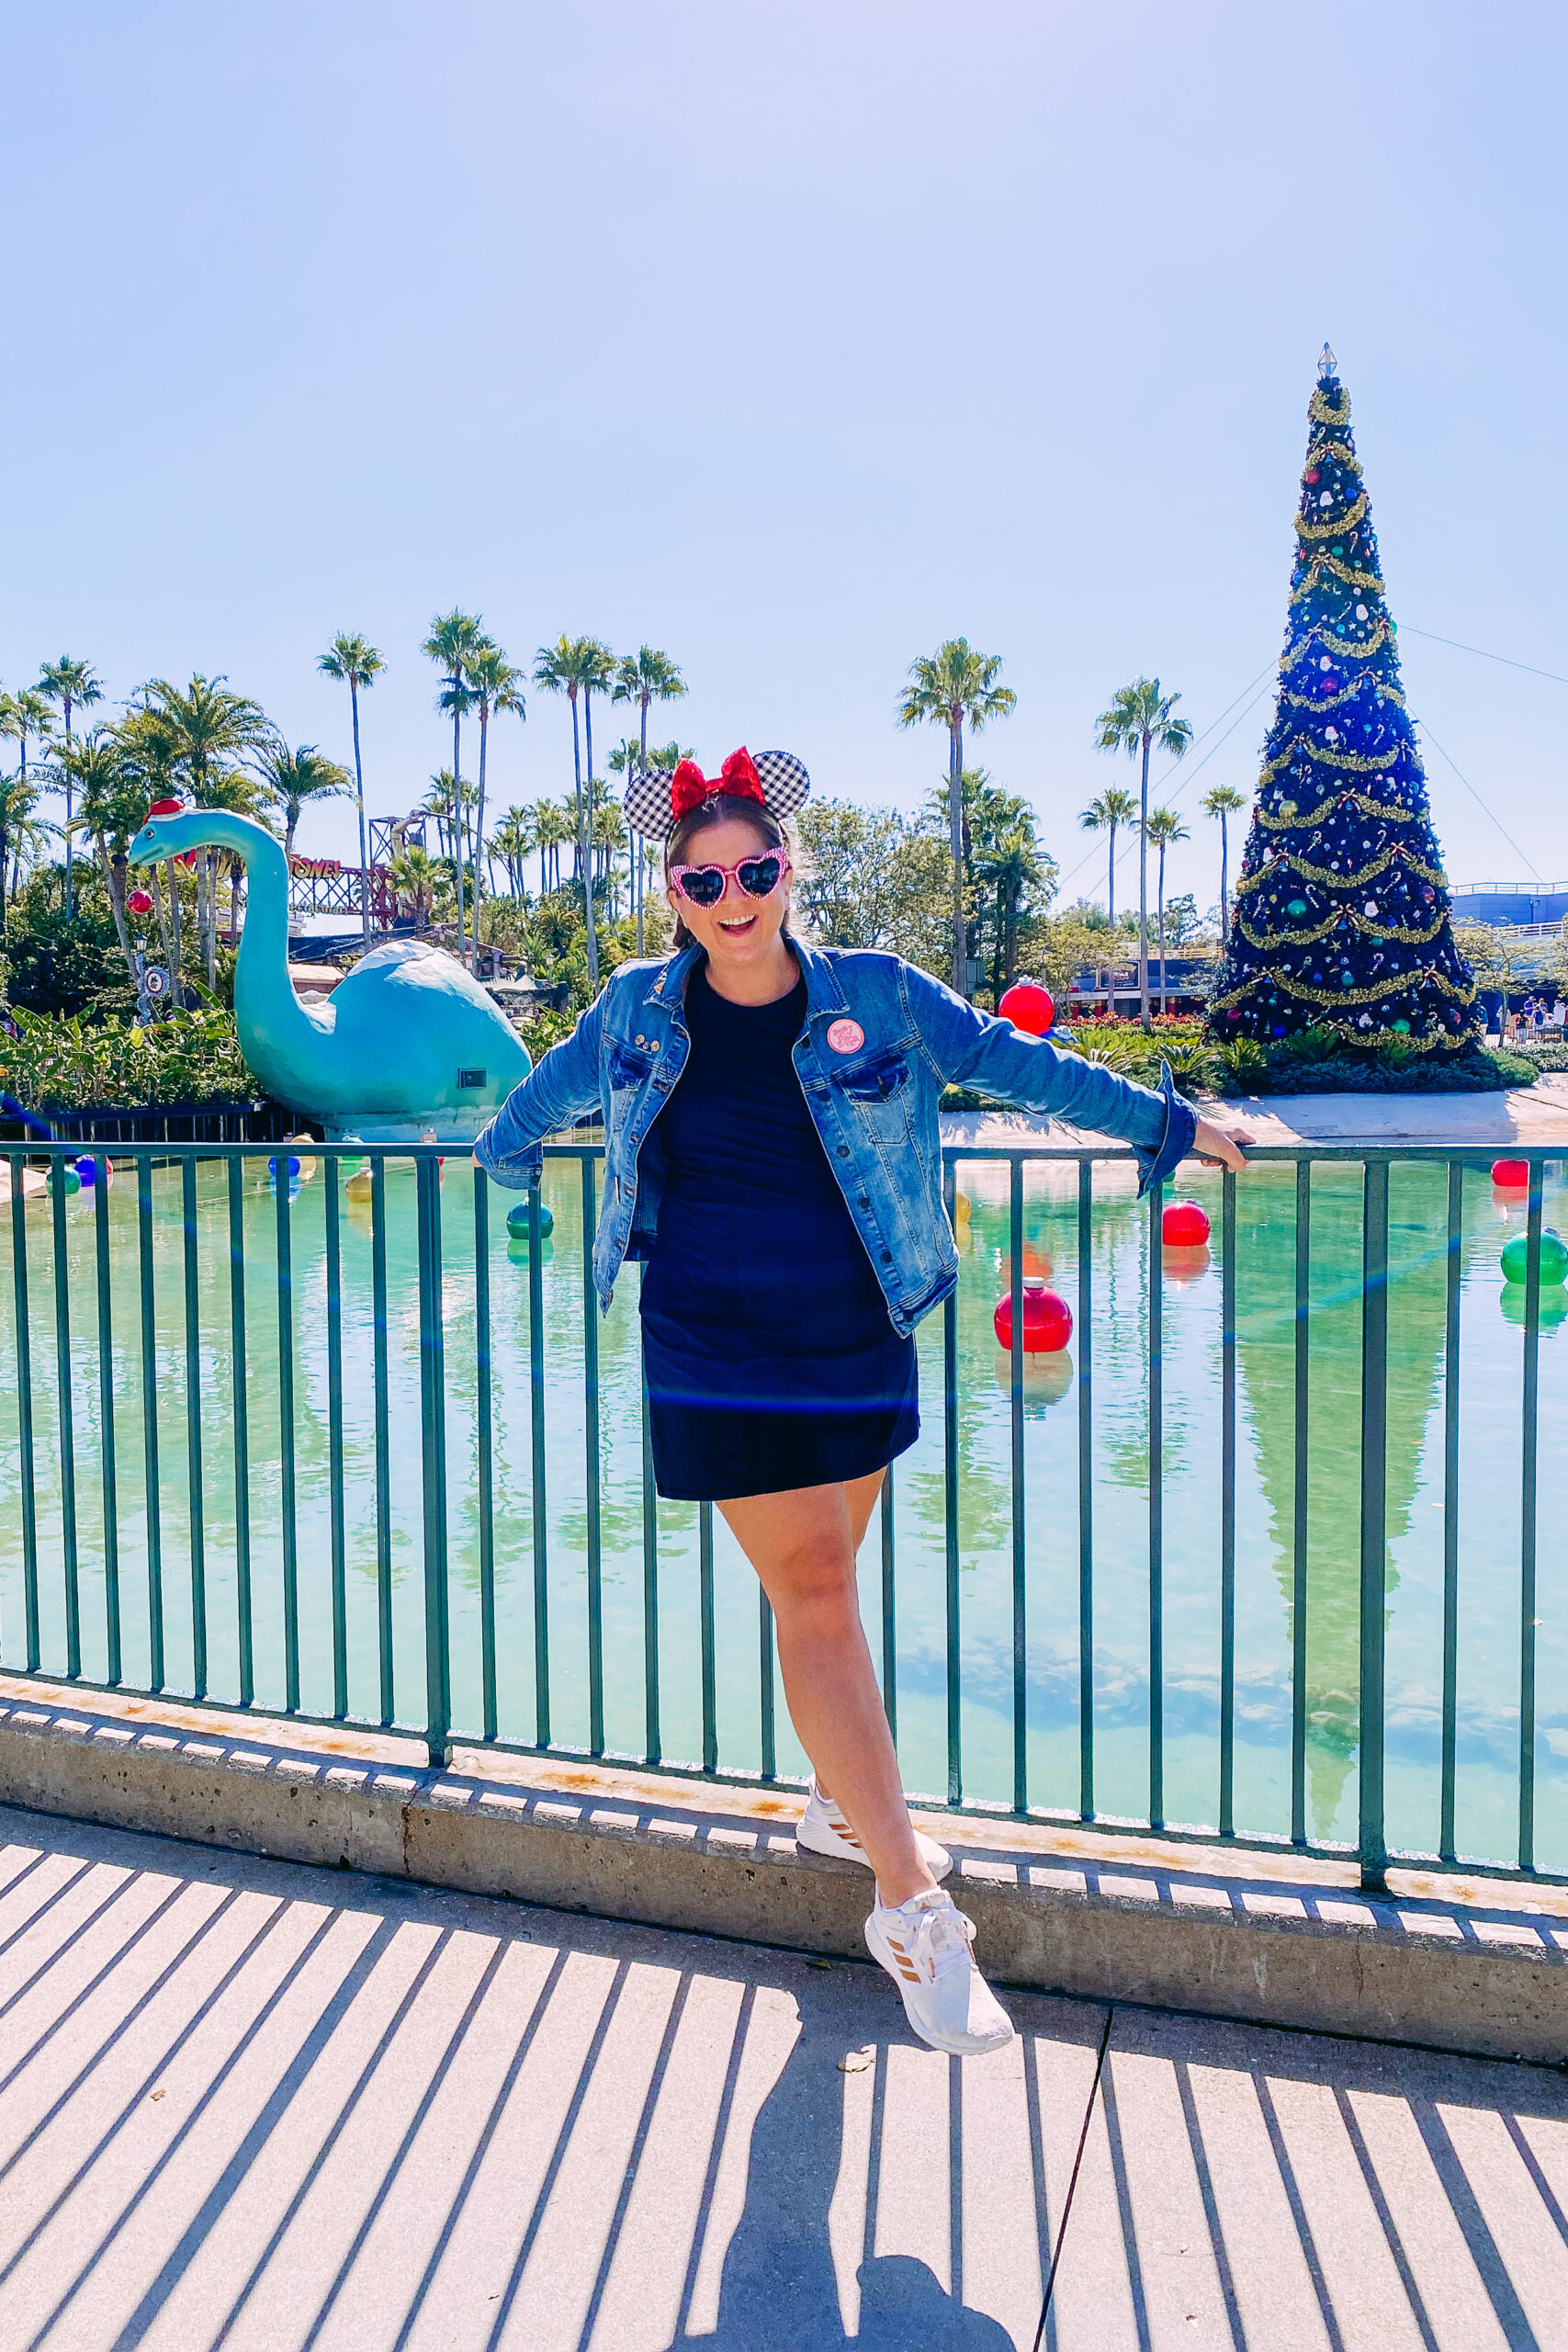 9 Cute Disneyland Outfit Ideas - Disney Outfits  Disneyland outfit summer, Disney  outfits women, Disneyland outfit spring